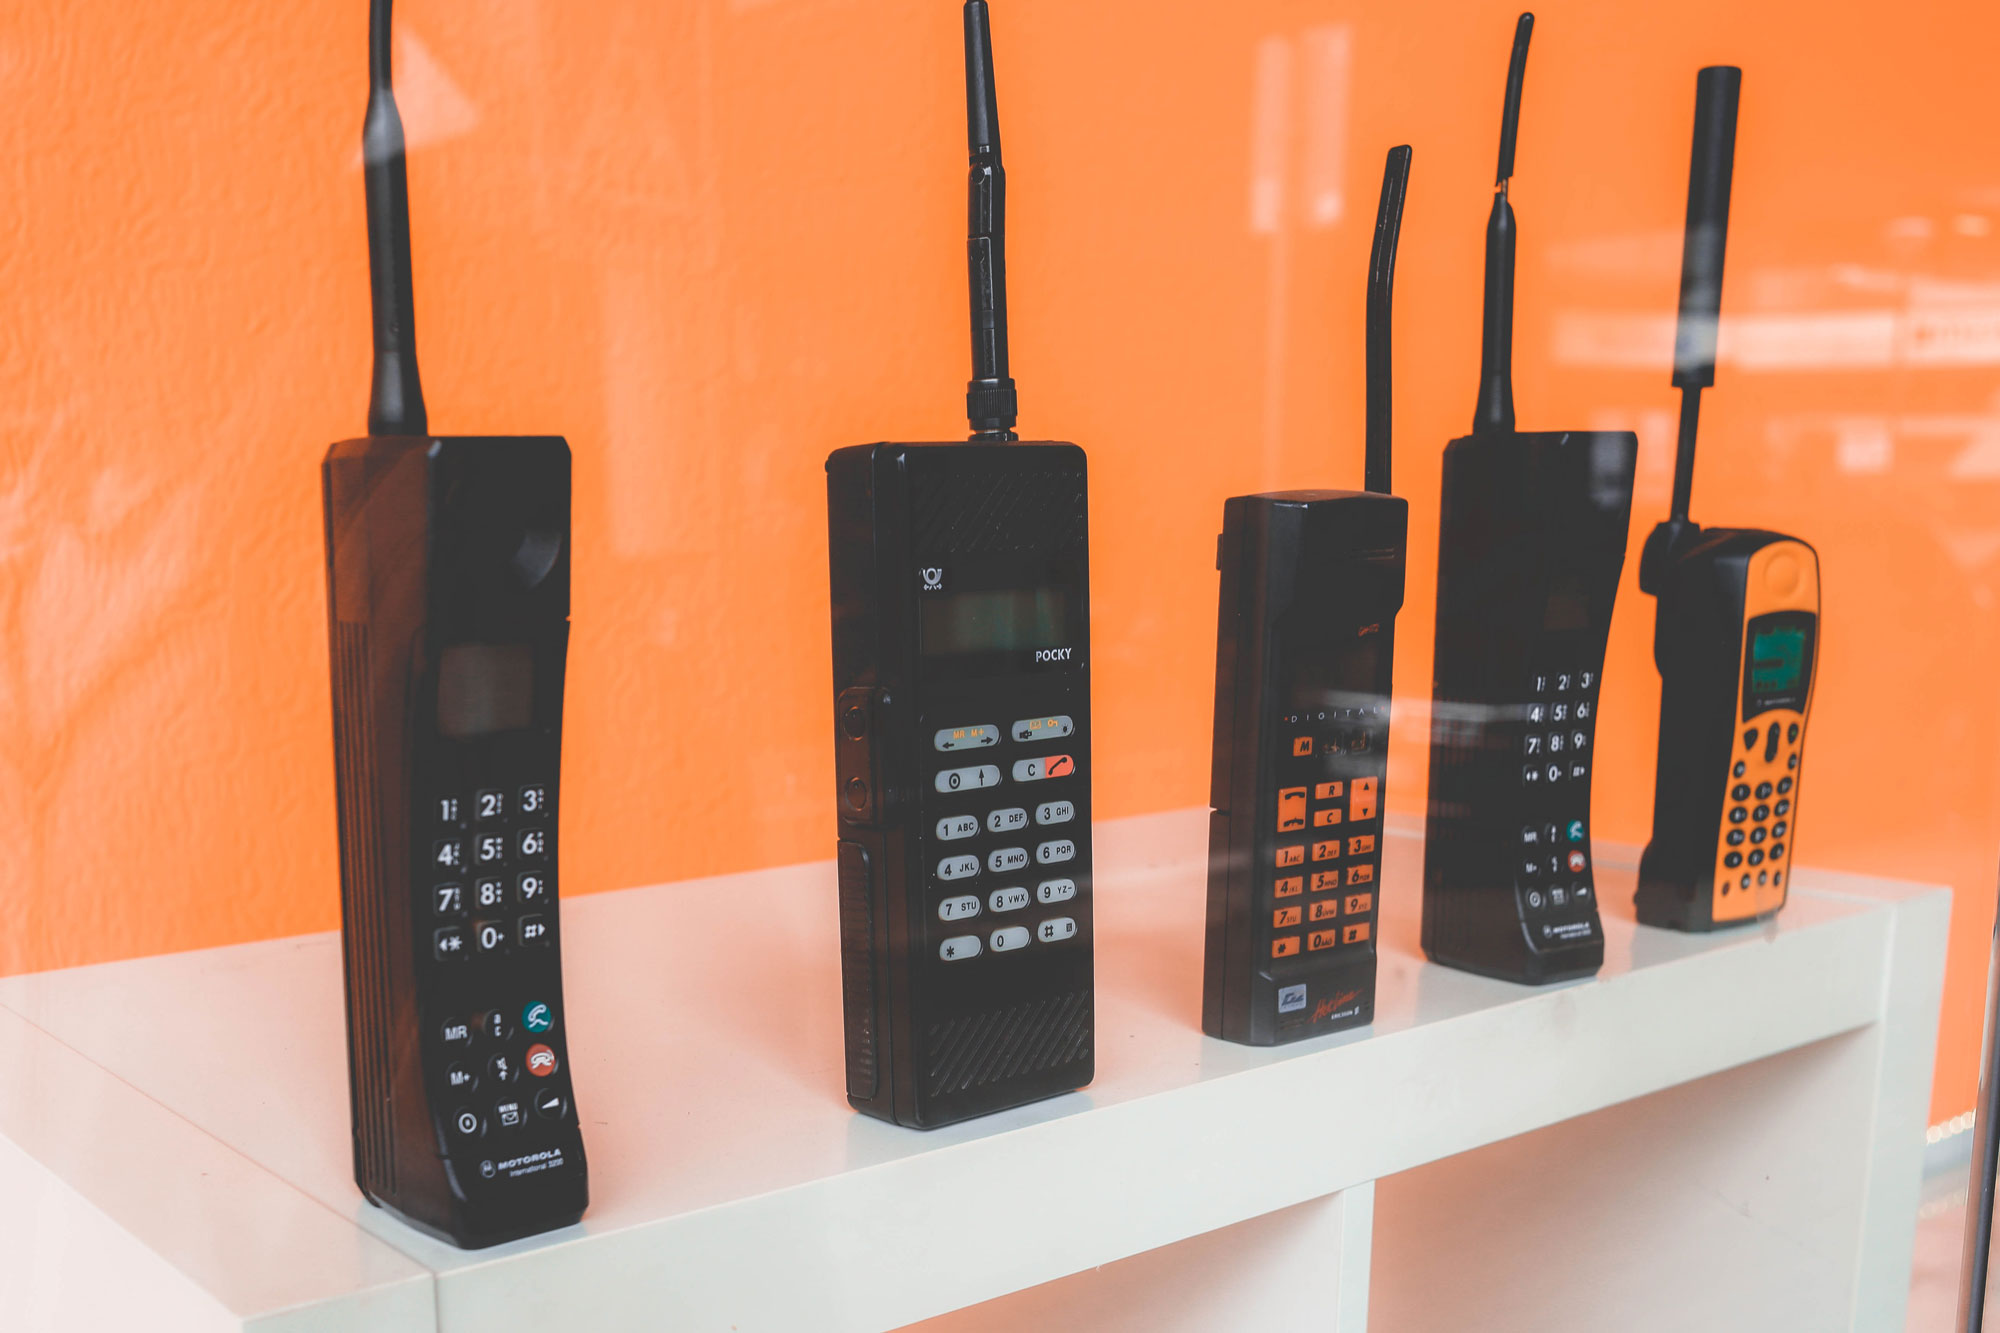 Vintage 1980s cordless phones completely changed how we talked to